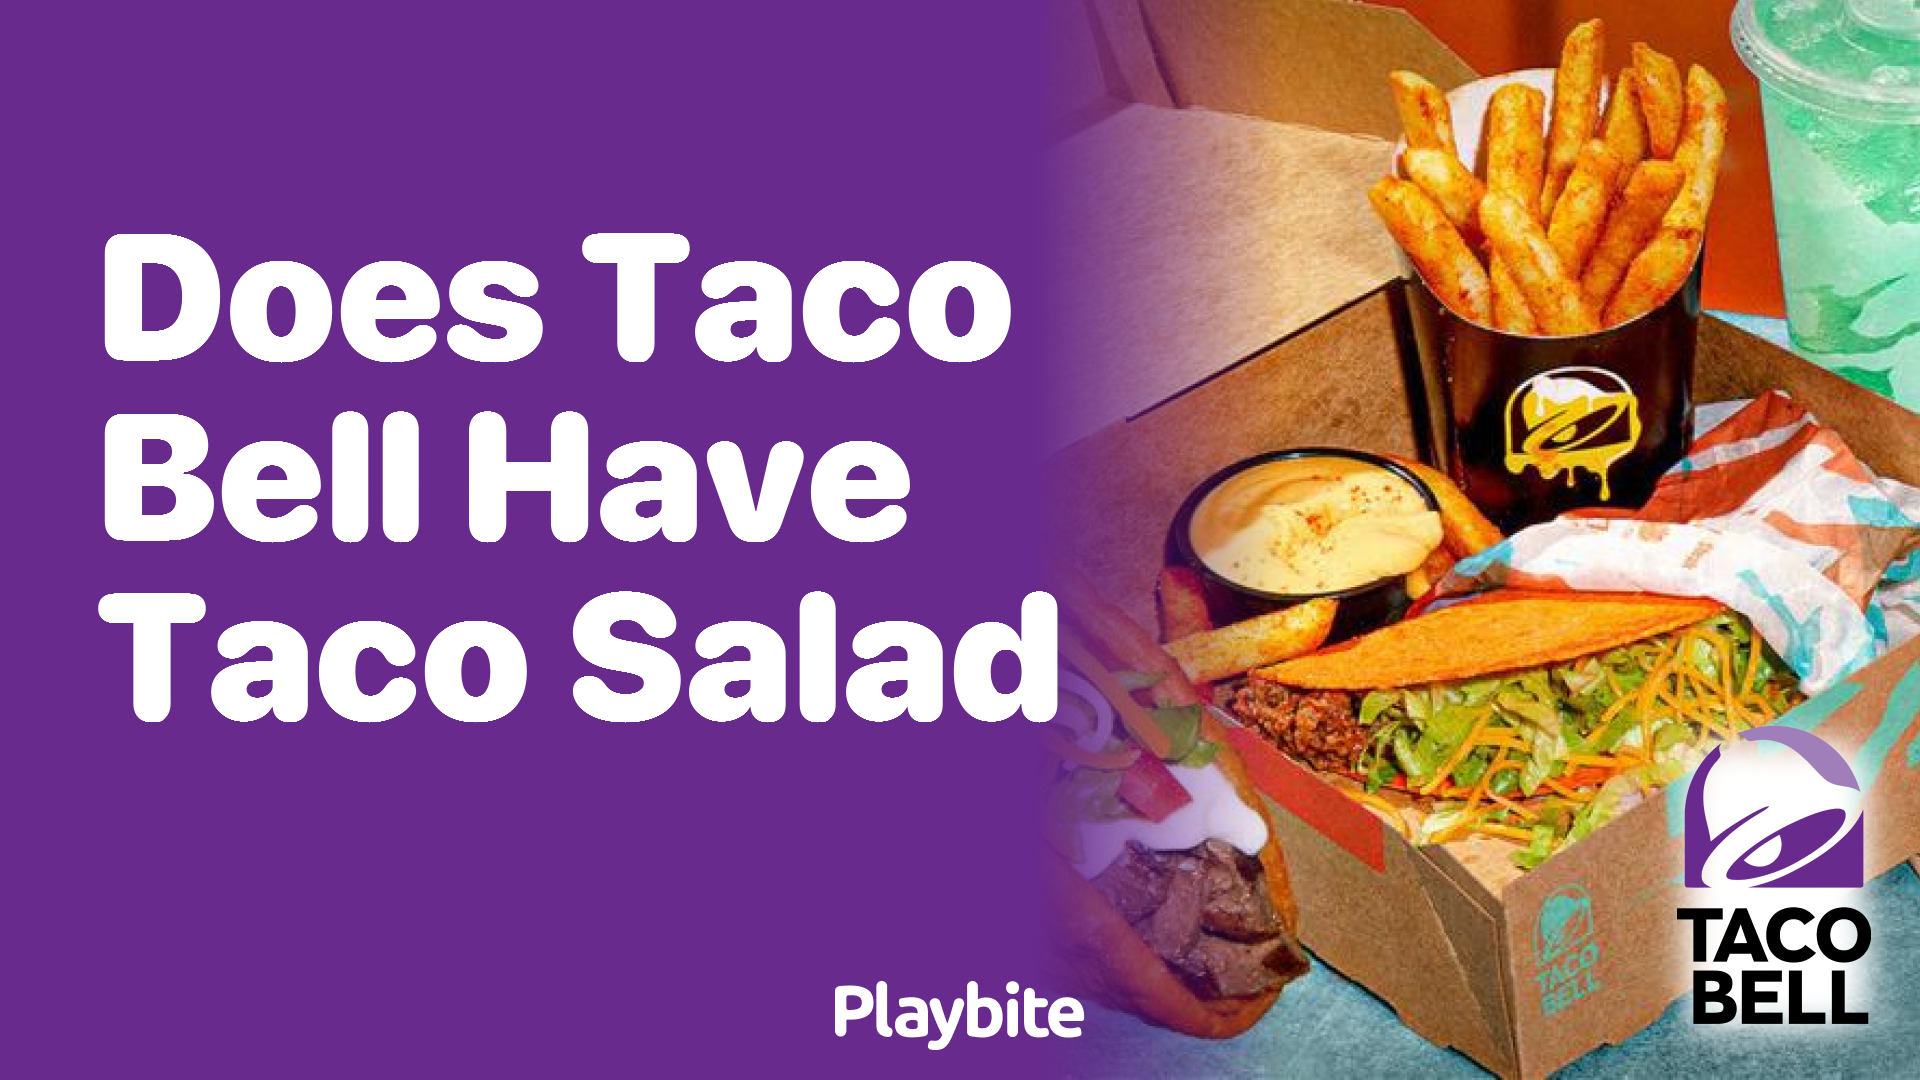 Does Taco Bell Have Taco Salad on Their Menu?